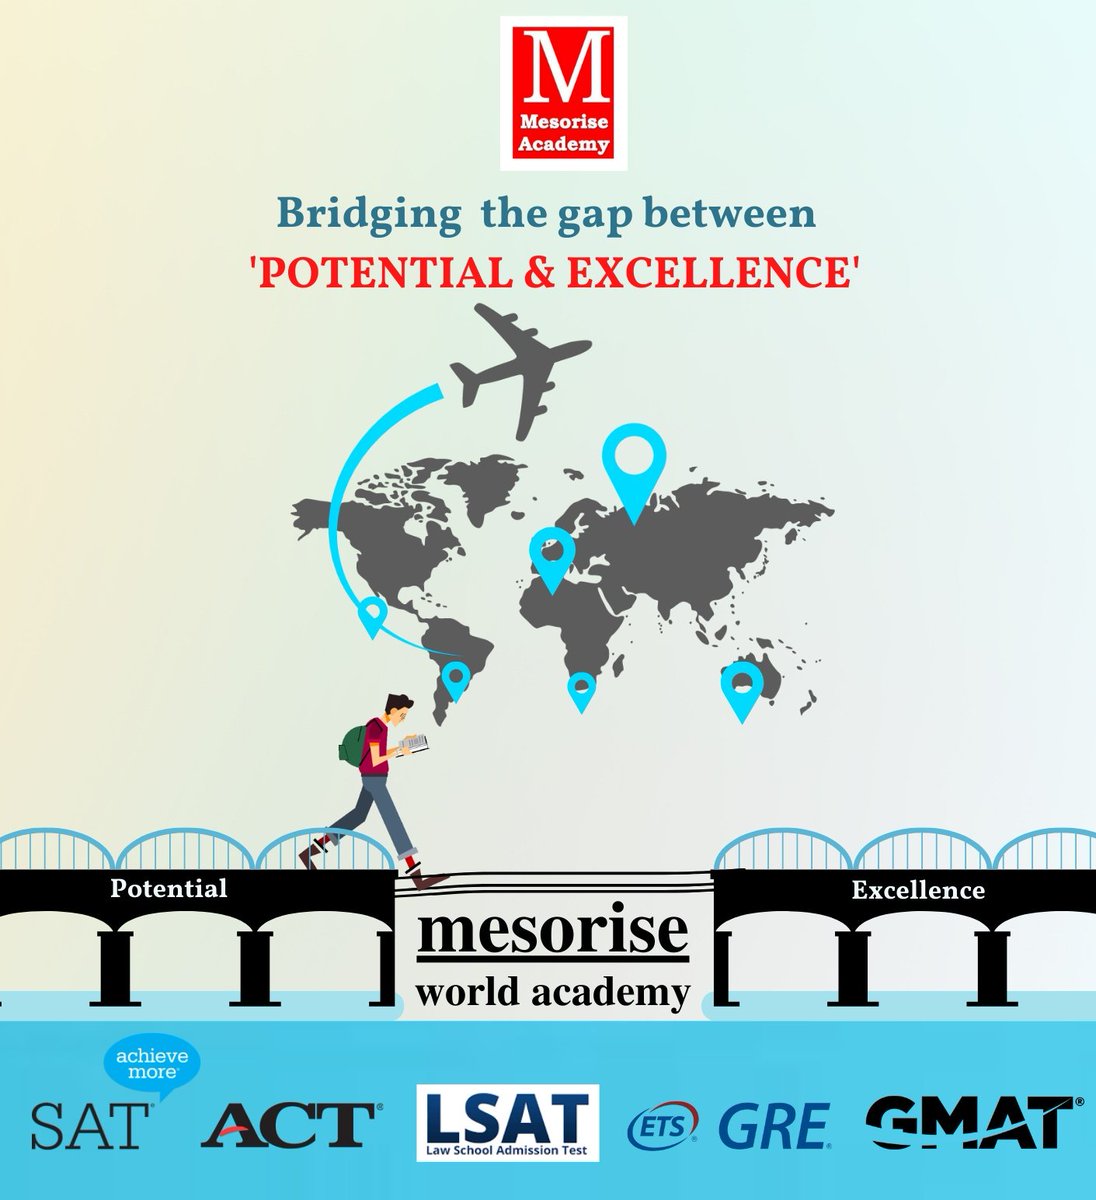 We have a strong team of skilled and knowledgeable faculty to bridge the gap between potential and excellence required to excel in International tests.
Schedule a demo class now - 8076837768
#LSAT #bestlsatcoaching #SAT #ACT #bestgmatcoaching  #GREcoaching #lsatusa #digitalsat